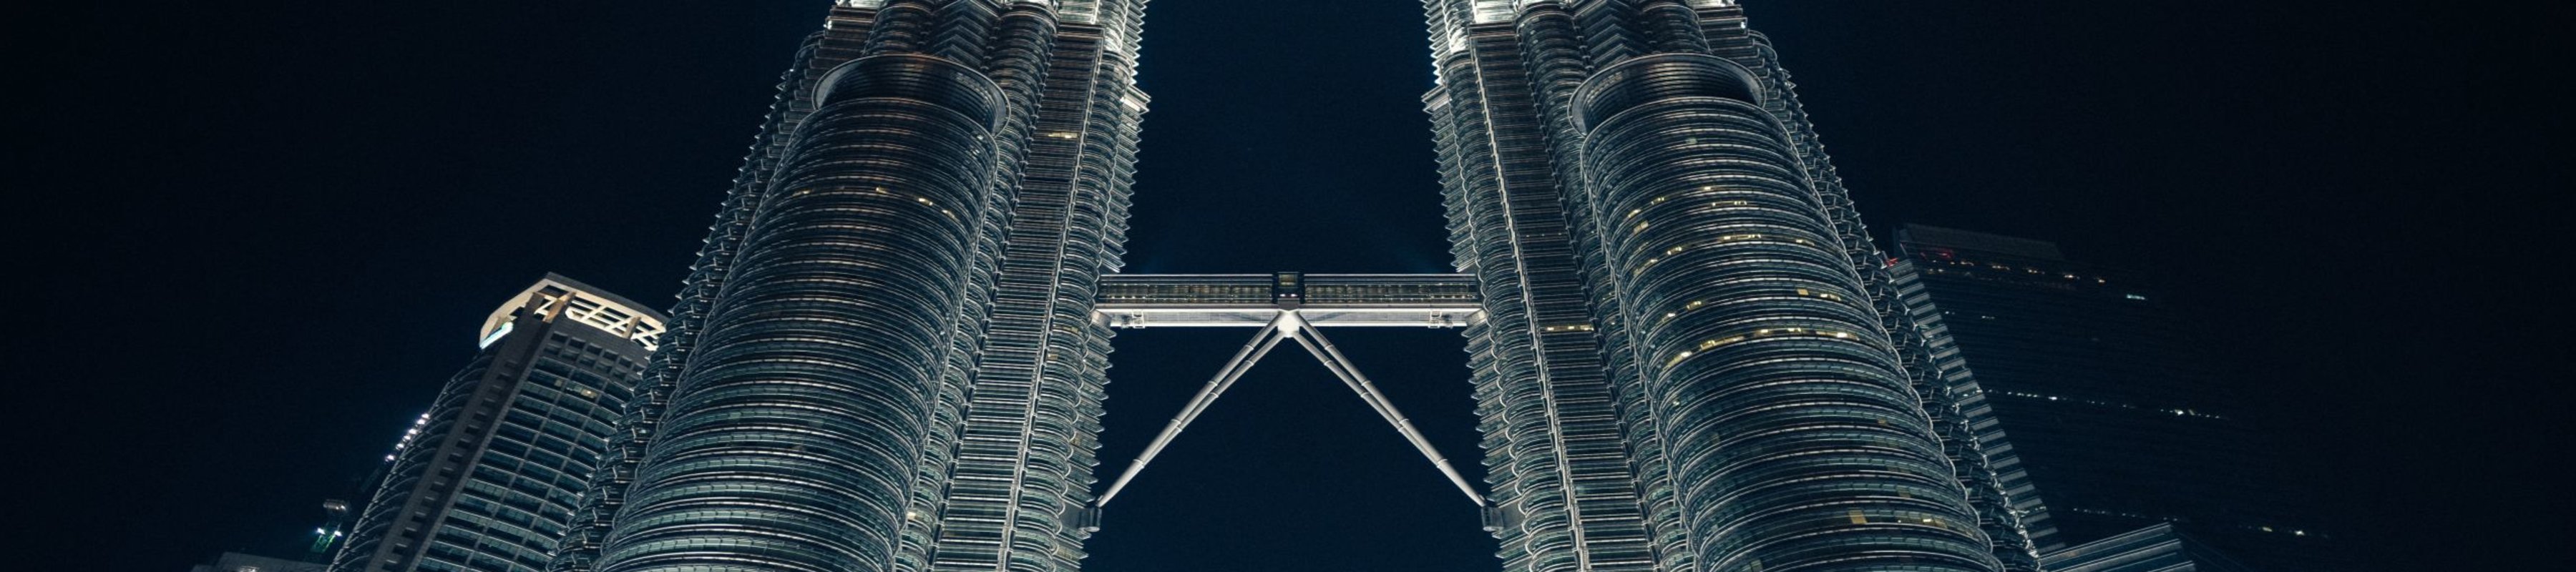 Image of twin building towers at an oblique angle